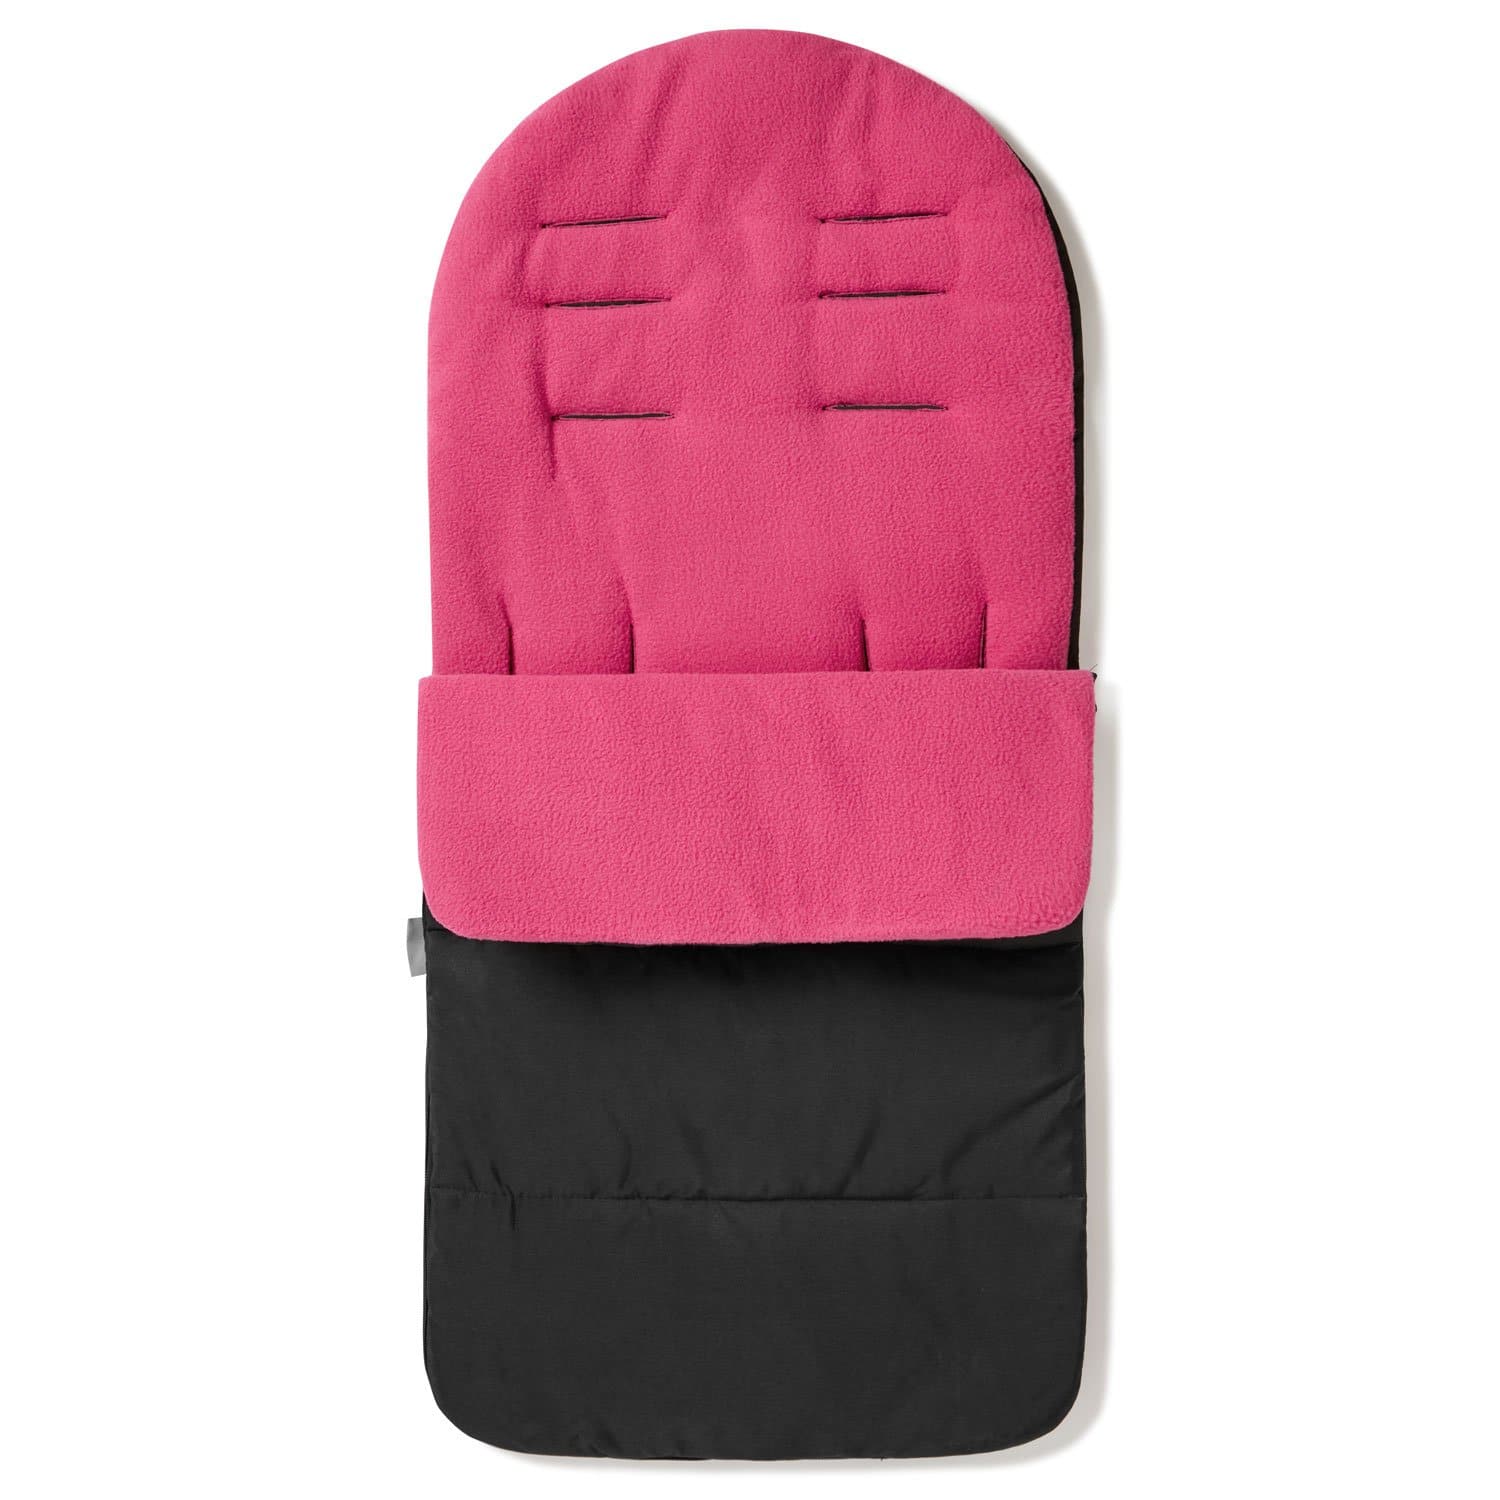 Premium Footmuff / Cosy Toes Compatible with Casual - Pink Rose / Fits All Models | For Your Little One